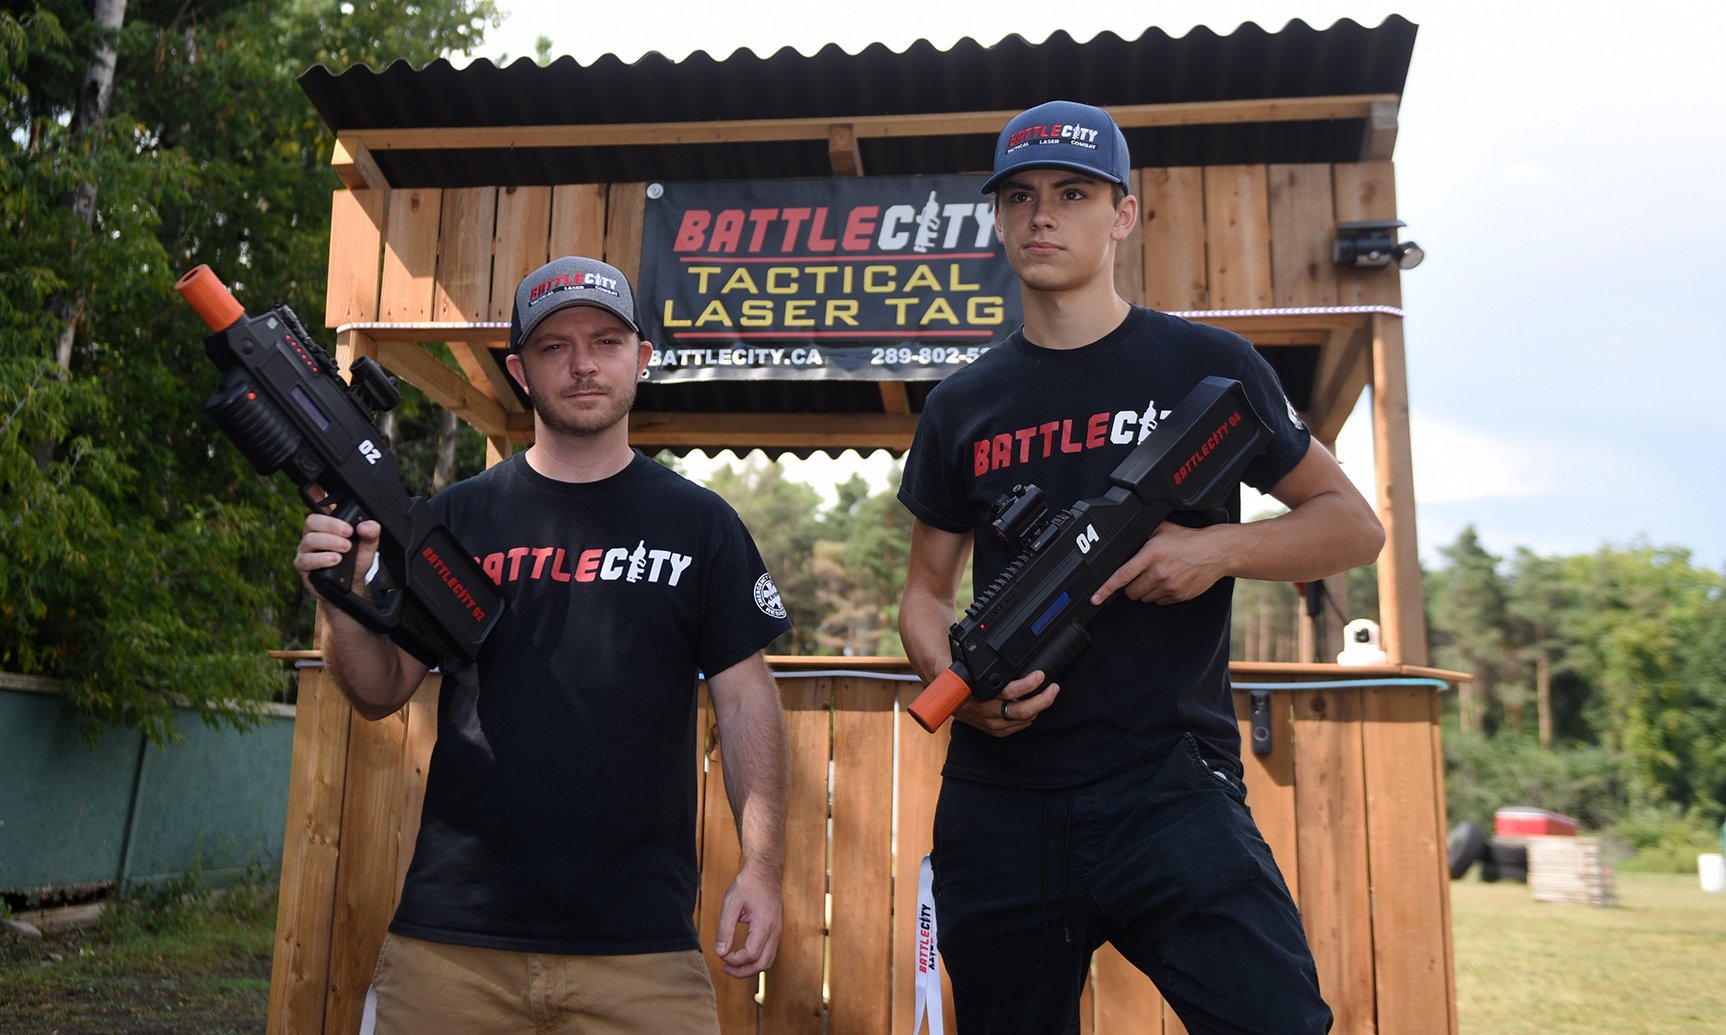 Full size lightbox of Battle City Tactical Laser Tag  image 1